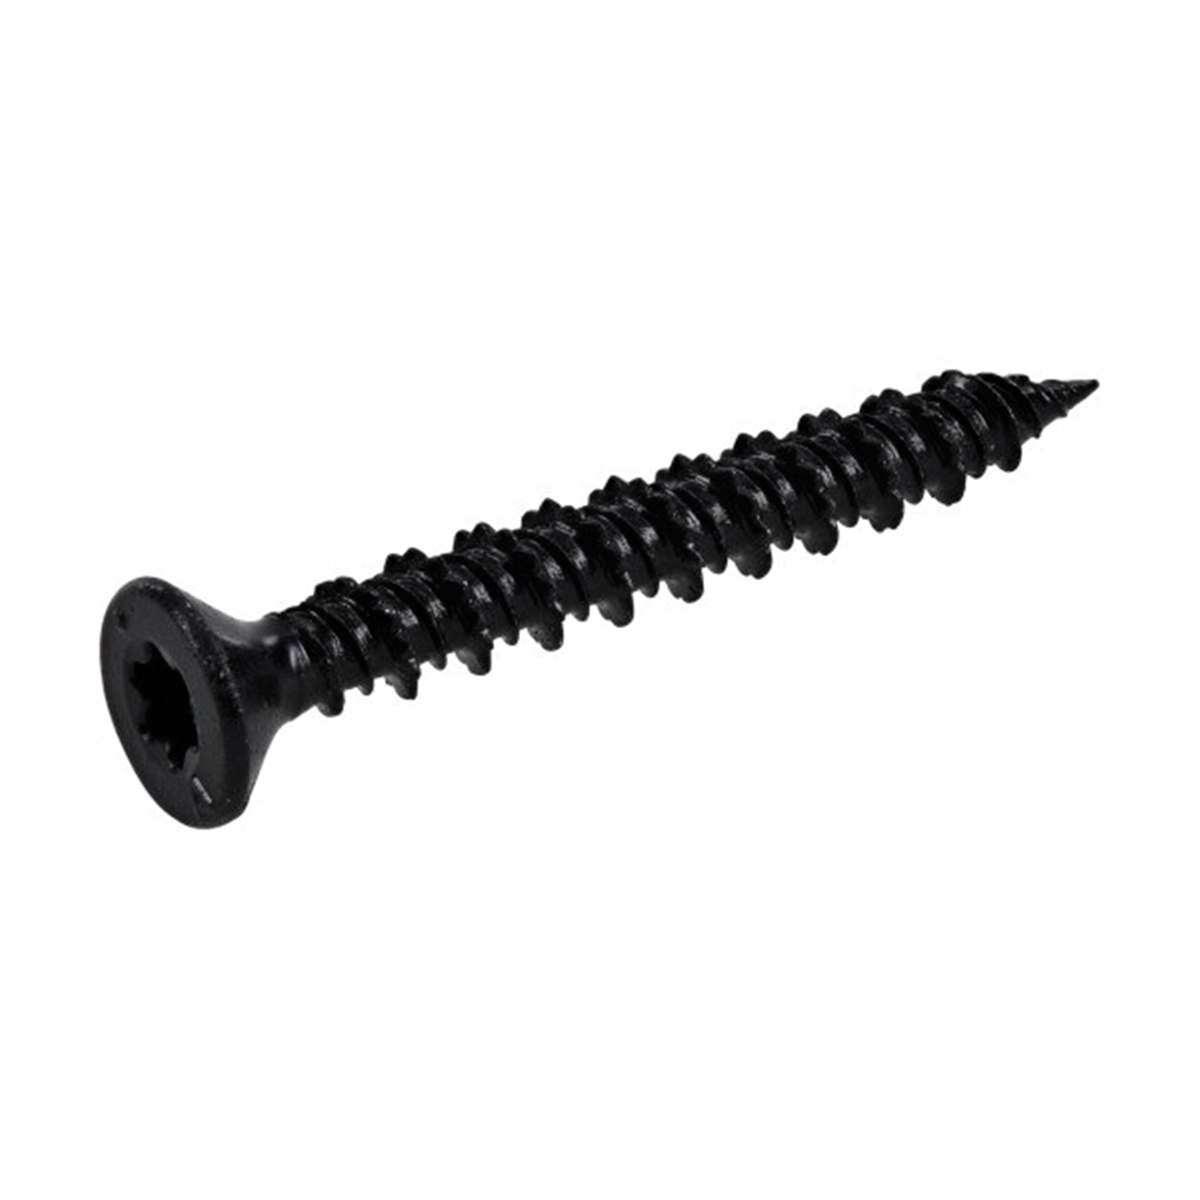 376598 Concrete Screw Anchor, 3/16 in Dia, 1-3/4 in L, Carbon Steel, Epoxy-Coated, 100/PK